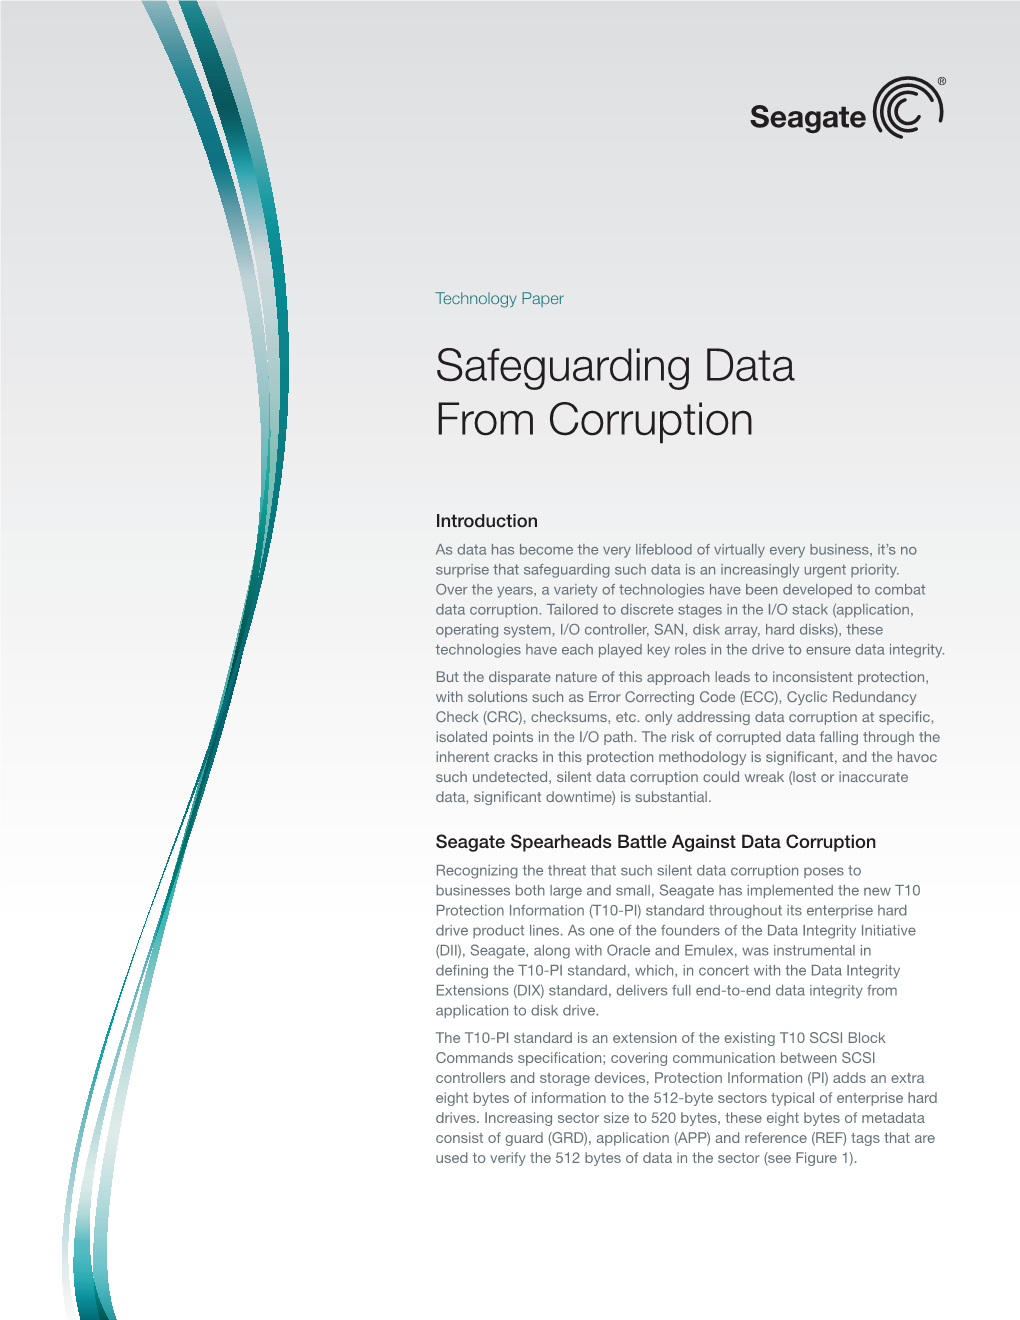 Safeguarding Data from Corruption